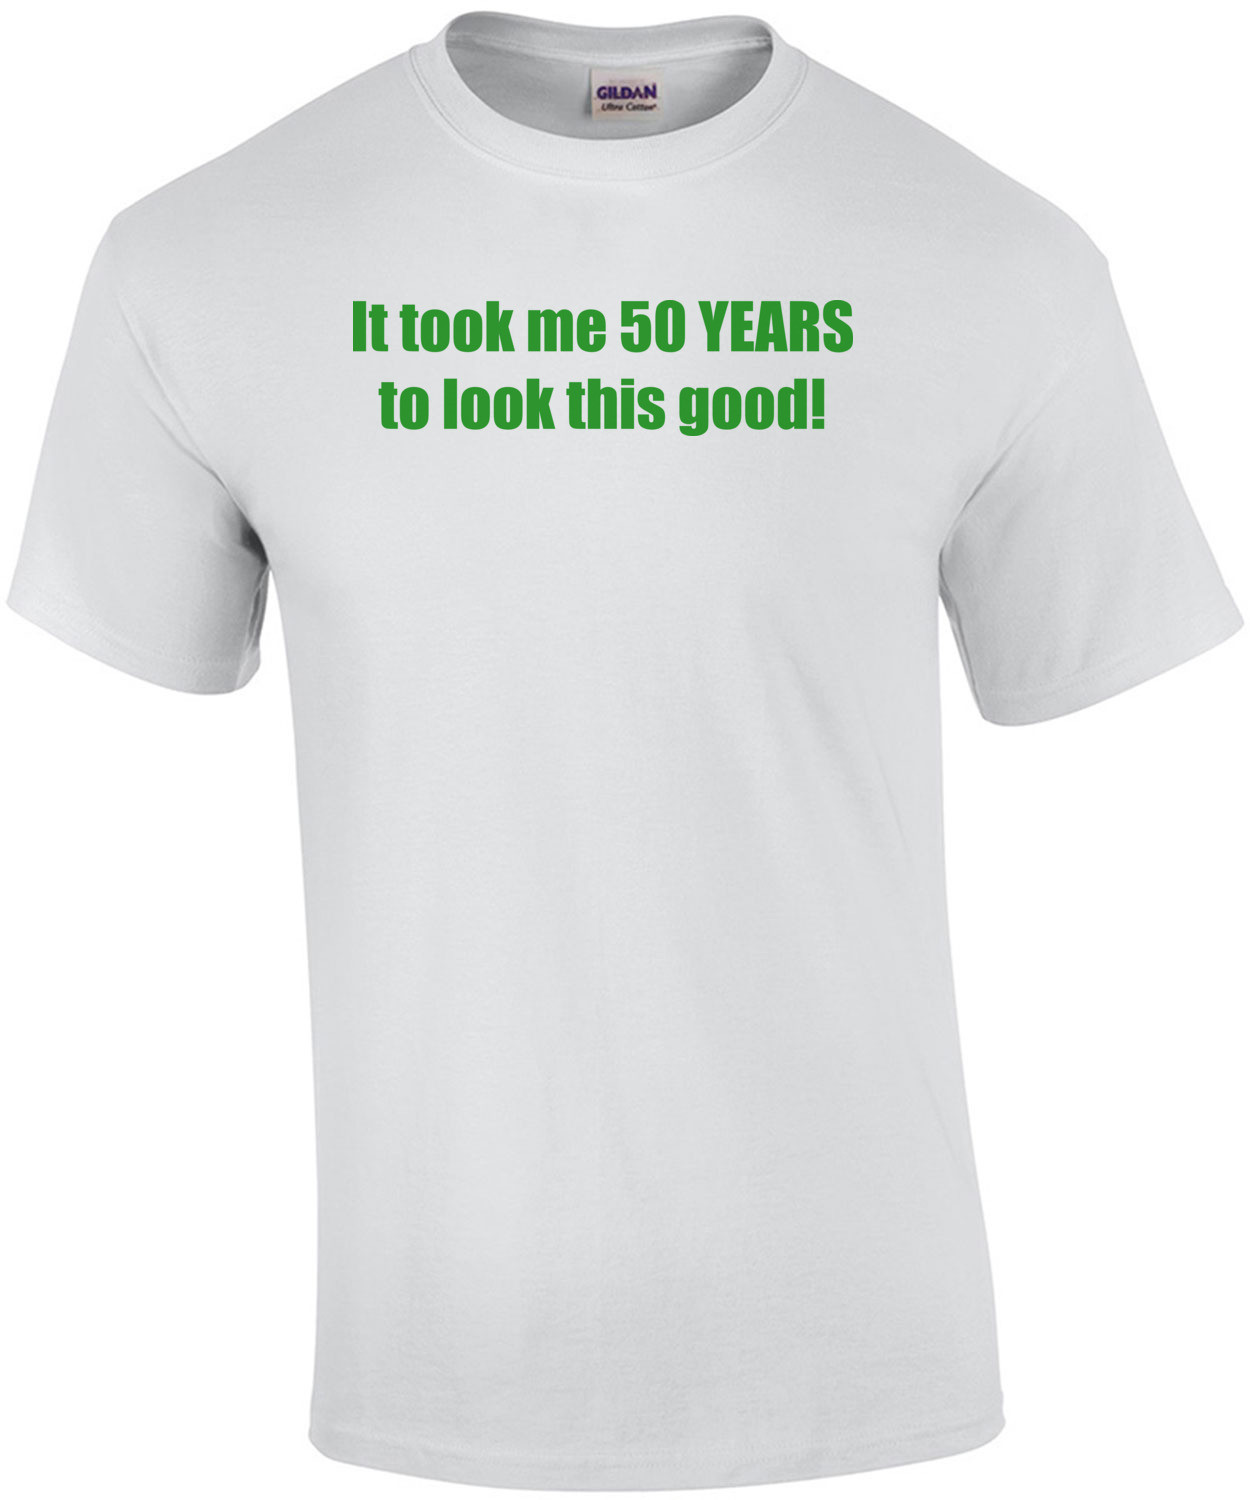 It took me 50 YEARS to look this good! - Happy Birthday Shirt